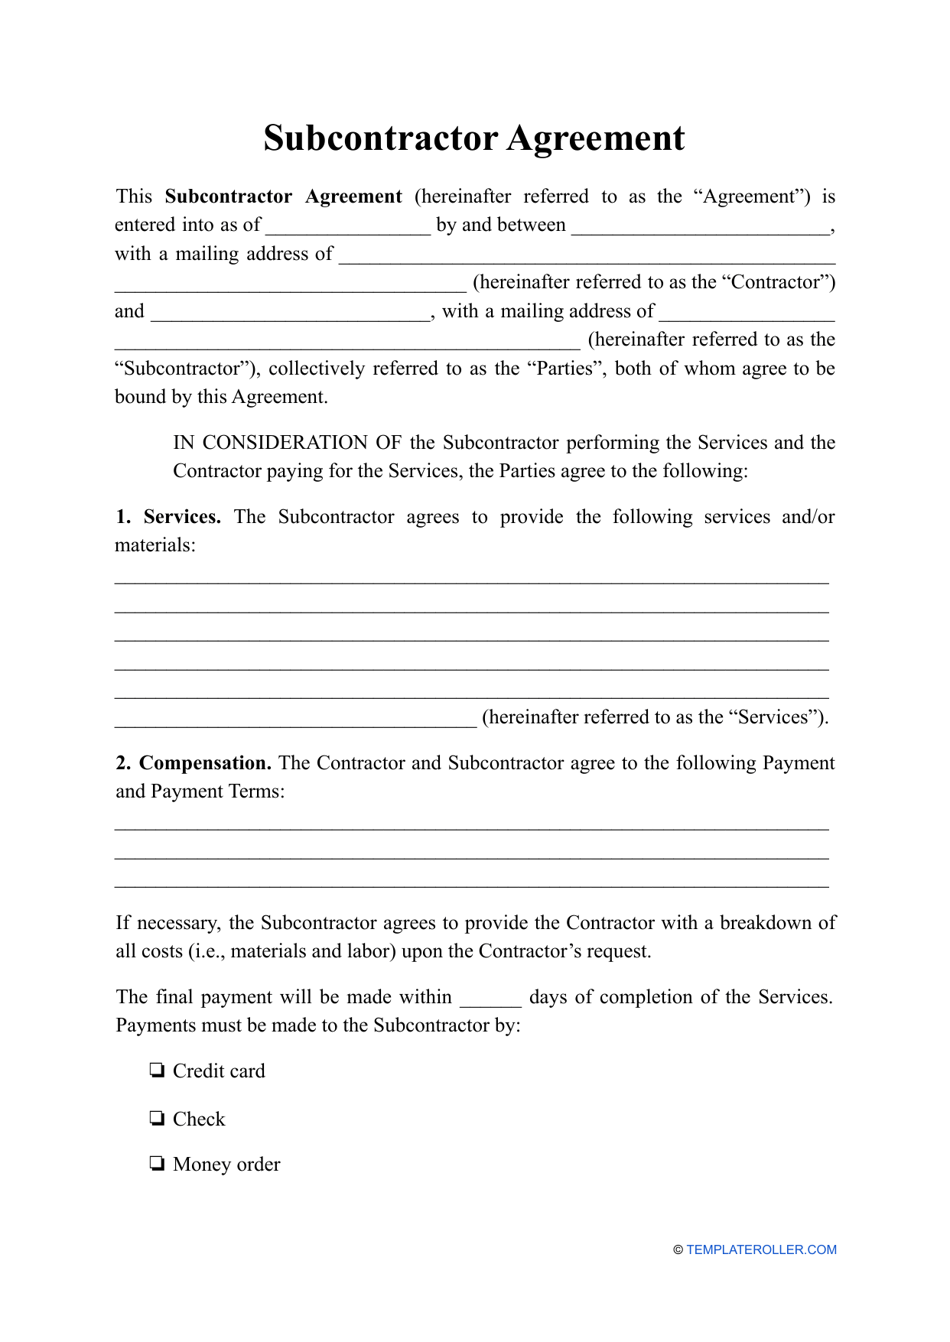 Subcontractor Agreement Template, Page 1